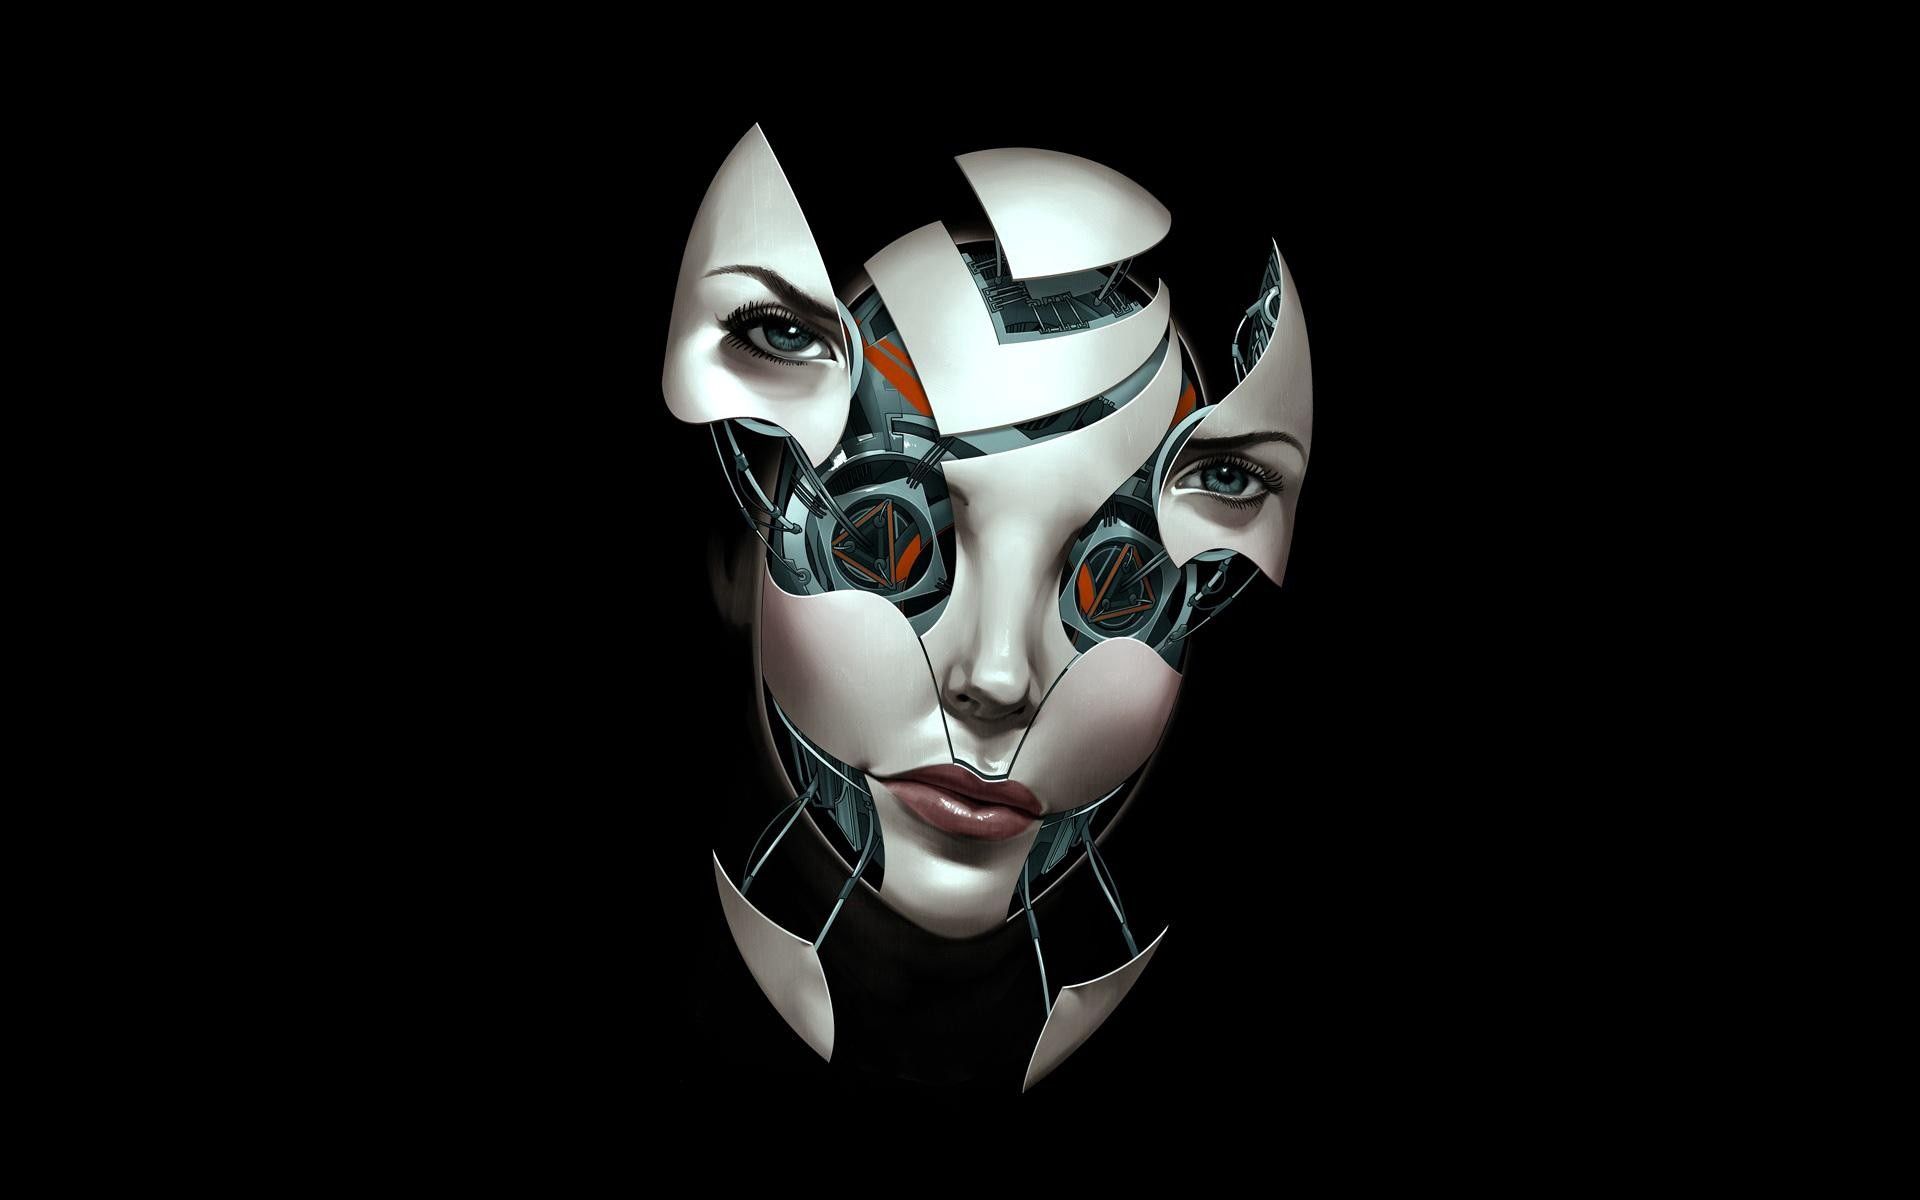 robot, abstract, face, dark background, shards, smithereens, compound